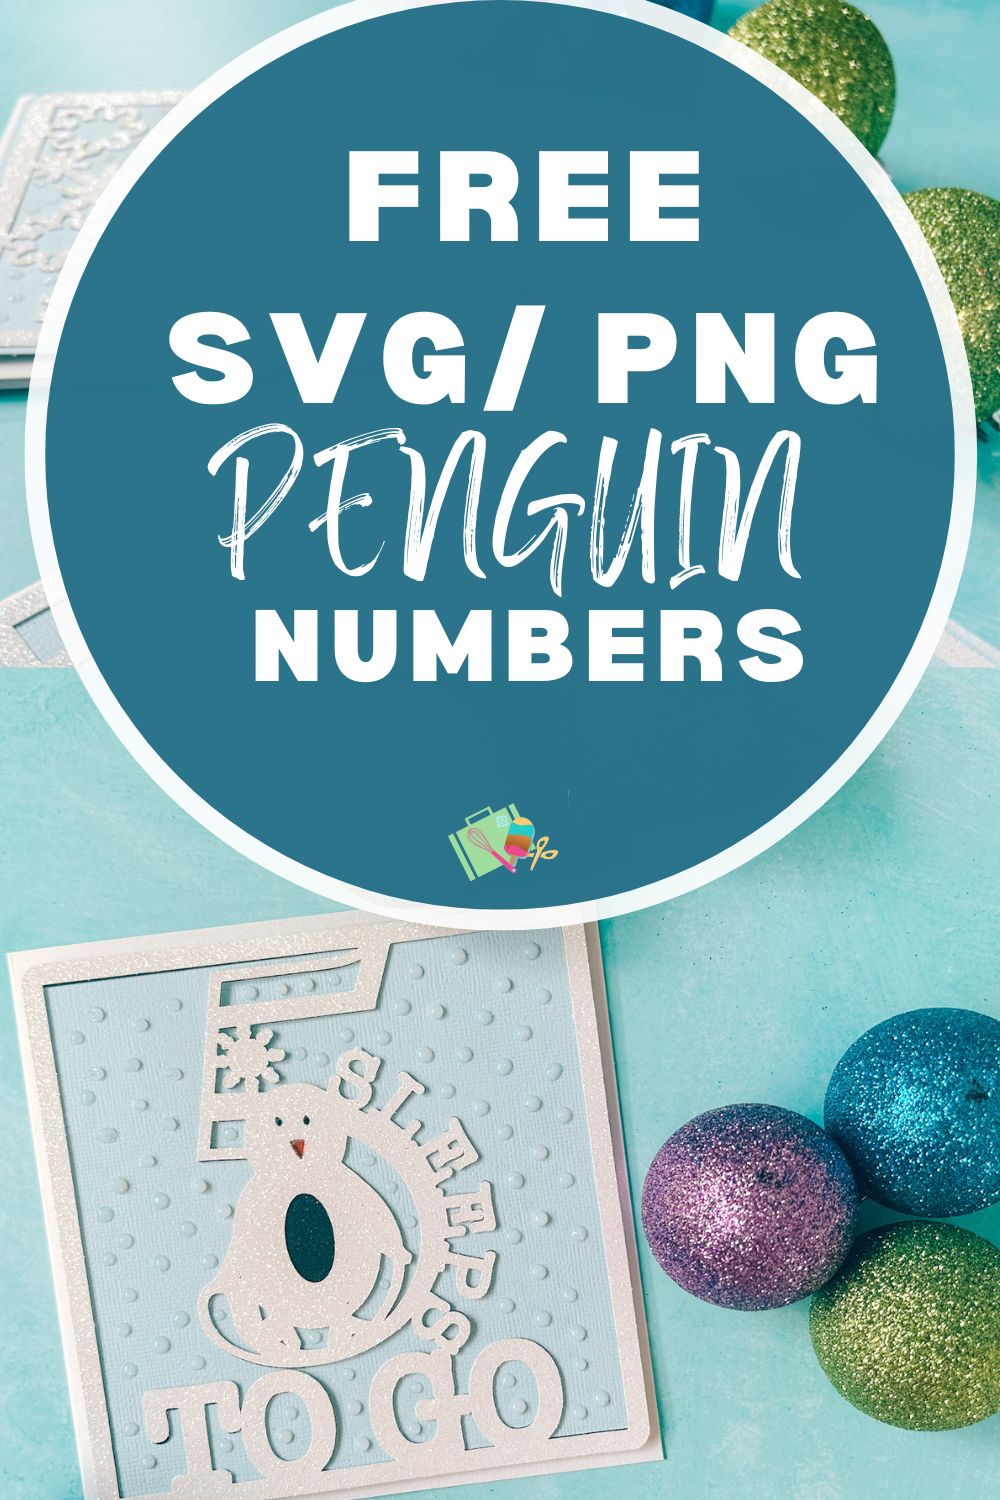 Free SVG PNG Penguin Numbers for Cricut and Silhouette